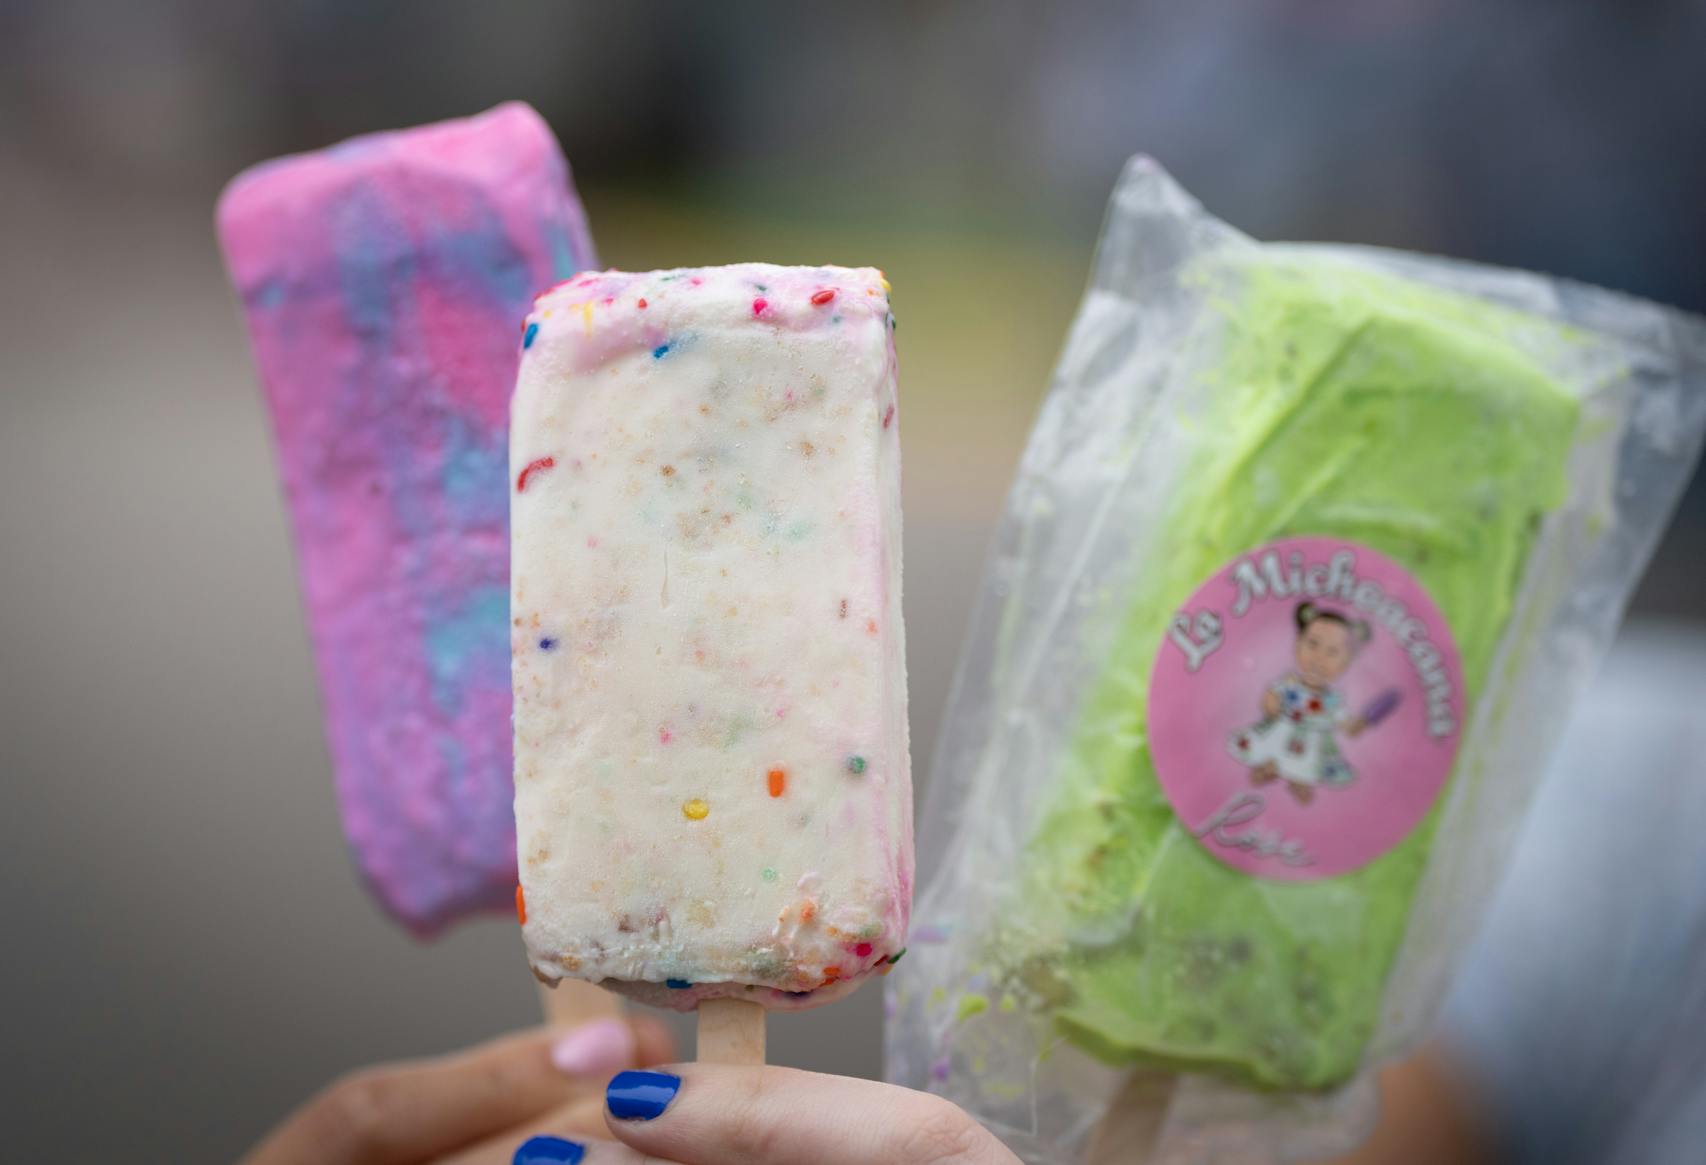 Birthday Cake Paleta from the Hamline Church Dining Hall. Also pictured is the bubblegum, at left, and pistachio, right. New foods at the Minnesota State Fair photographed on Thursday, Aug. 25, 2022 in Falcon Heights, Minn. ] RENEE JONES SCHNEIDER • renee.jones@startribune.com